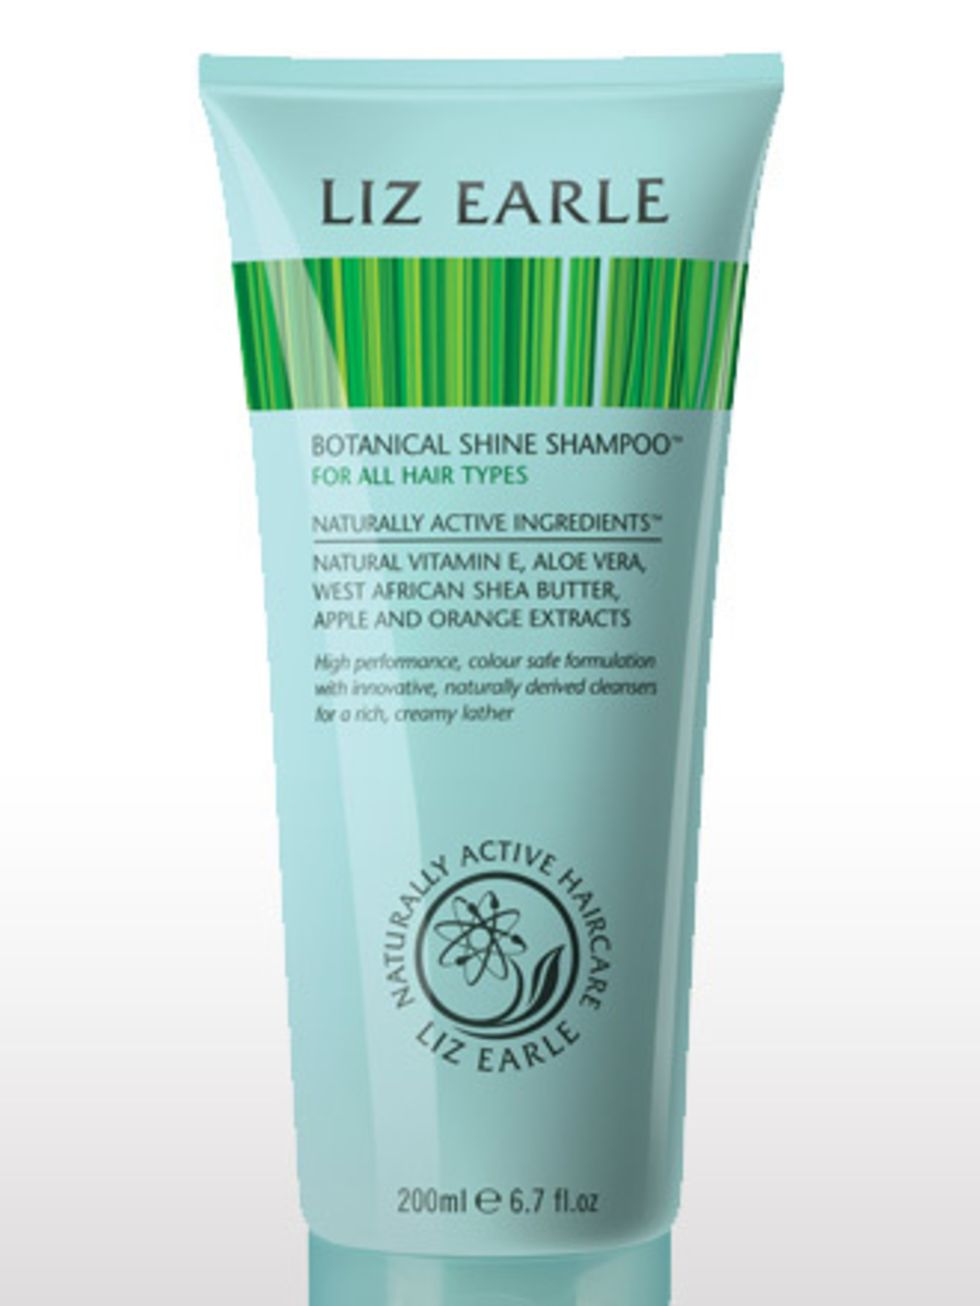 <p>This is Liz Earle's first foray into haircare, and as a brand known for its natural skincare formulas, I was a smidge sceptical. I was thrilled to be provenwrong. The milky texture smells of wonderfully clean botanicals and works up a proper lather. An